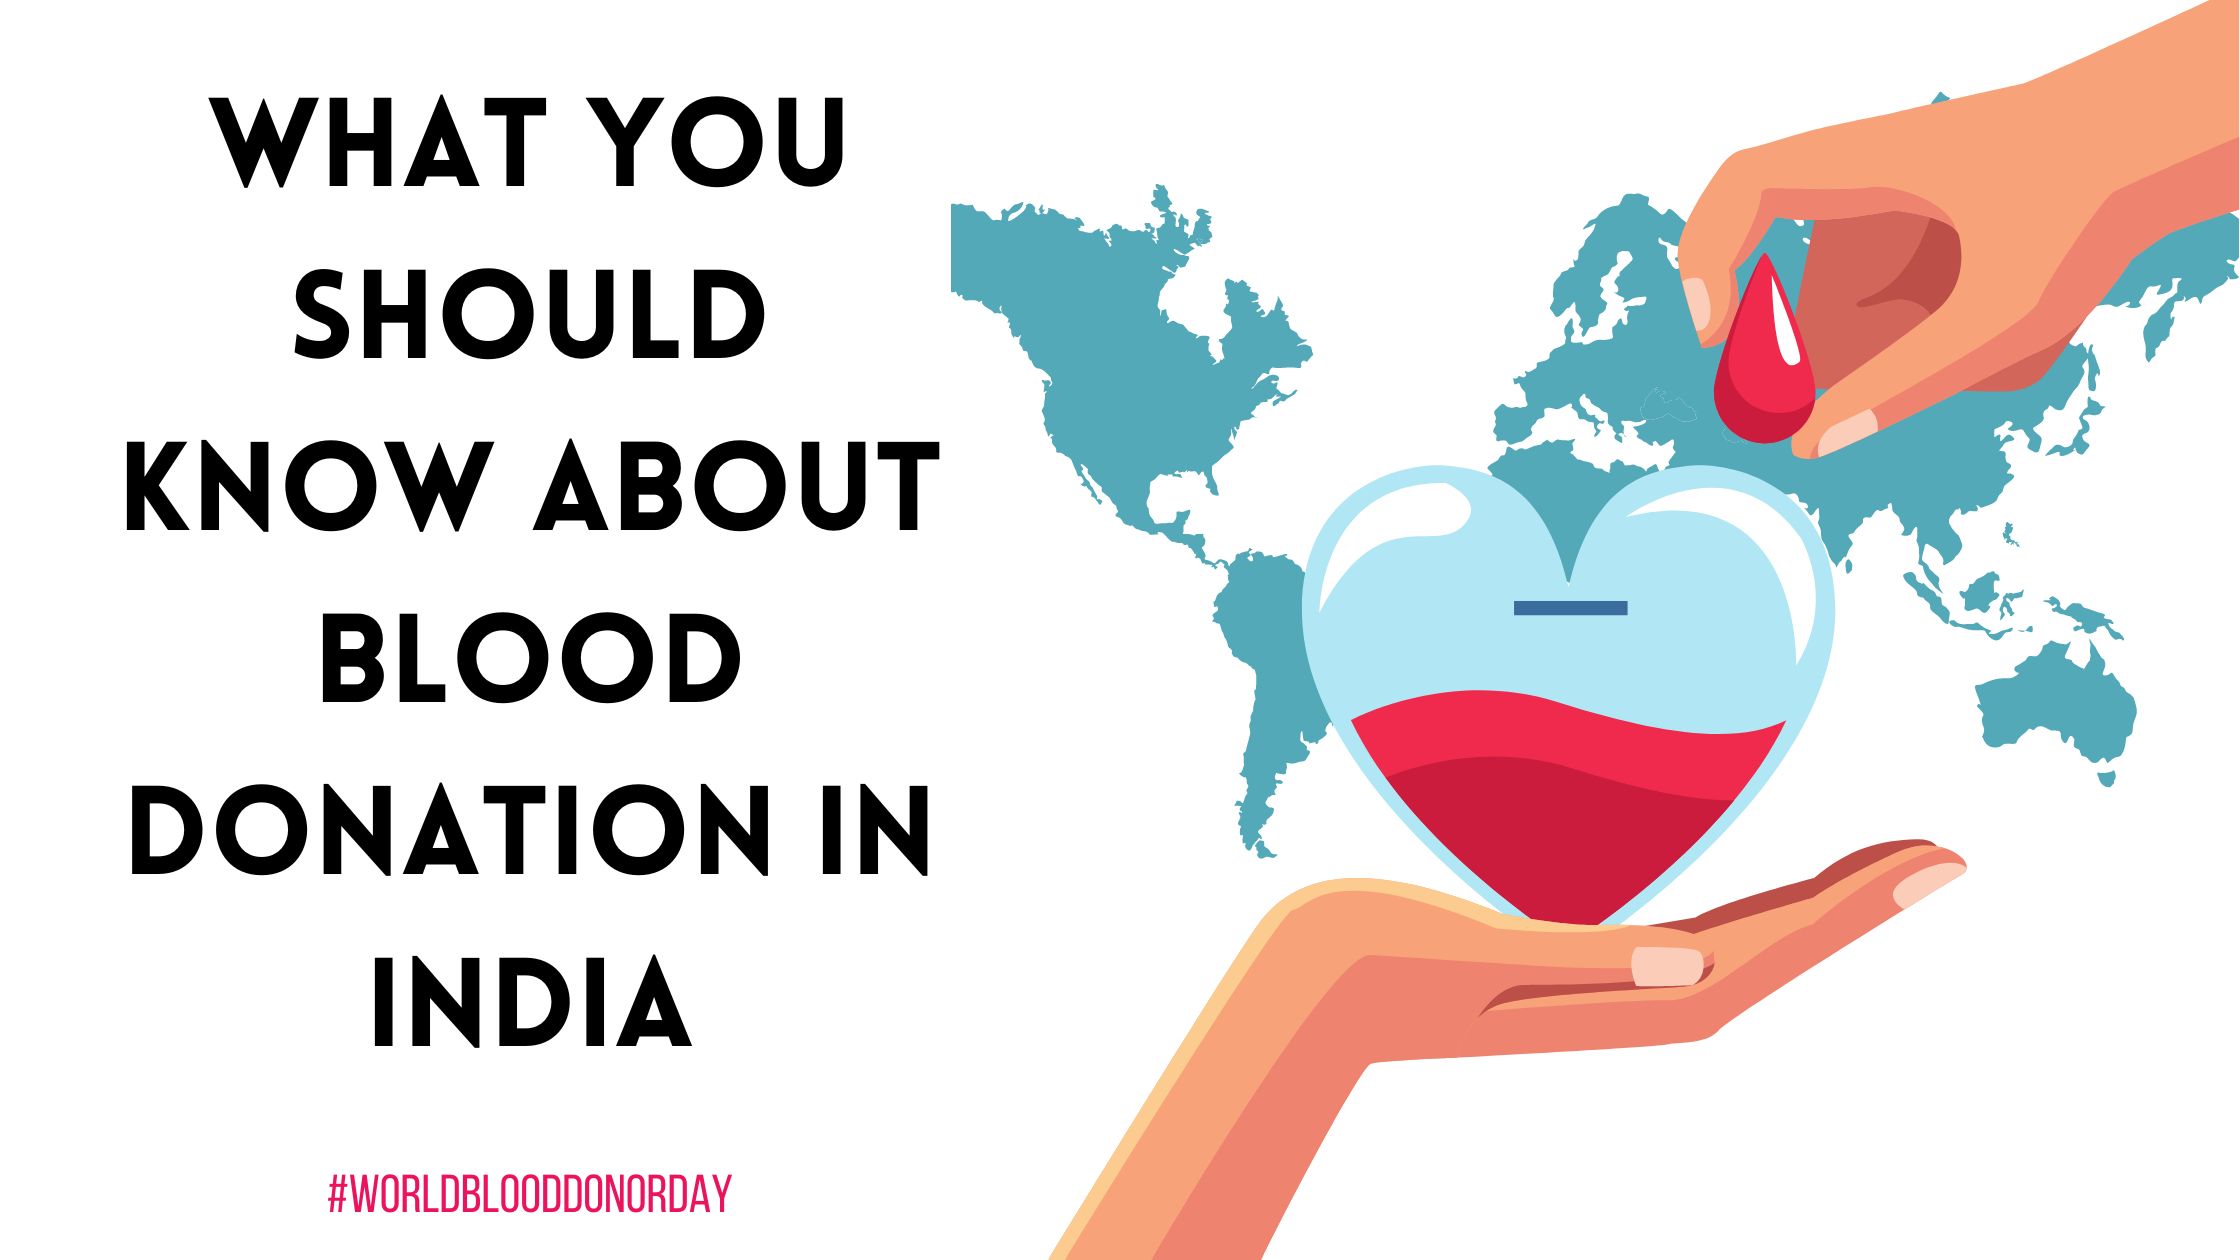 What you should know about blood donation in India